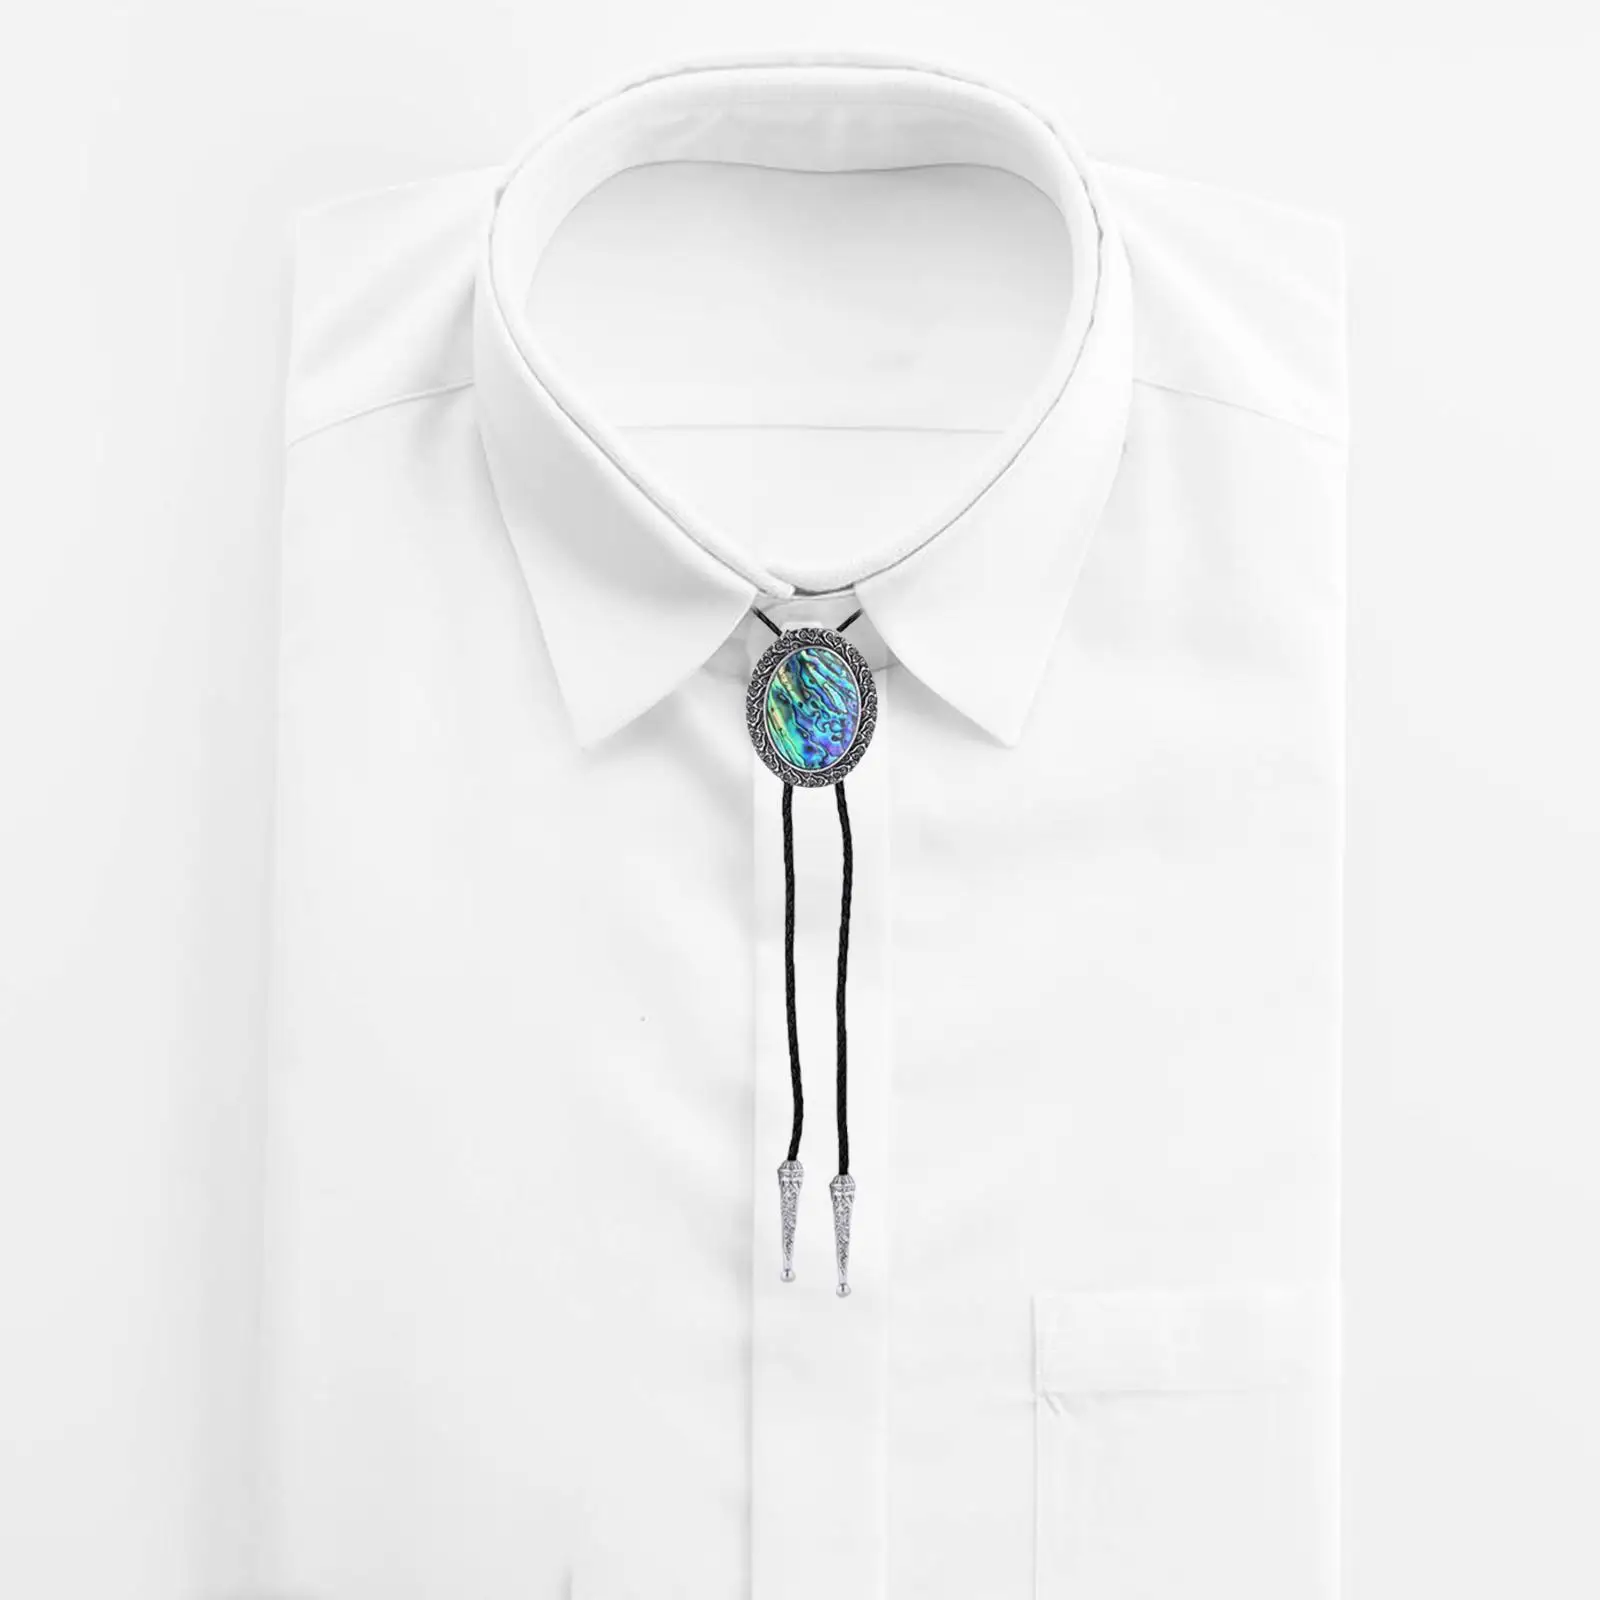 Fashion Vintage Style Bolo Tie Shirt Neck Ties Costume Accessories Western Necklace Tie Adjustable Rope for Women Birthday Gift